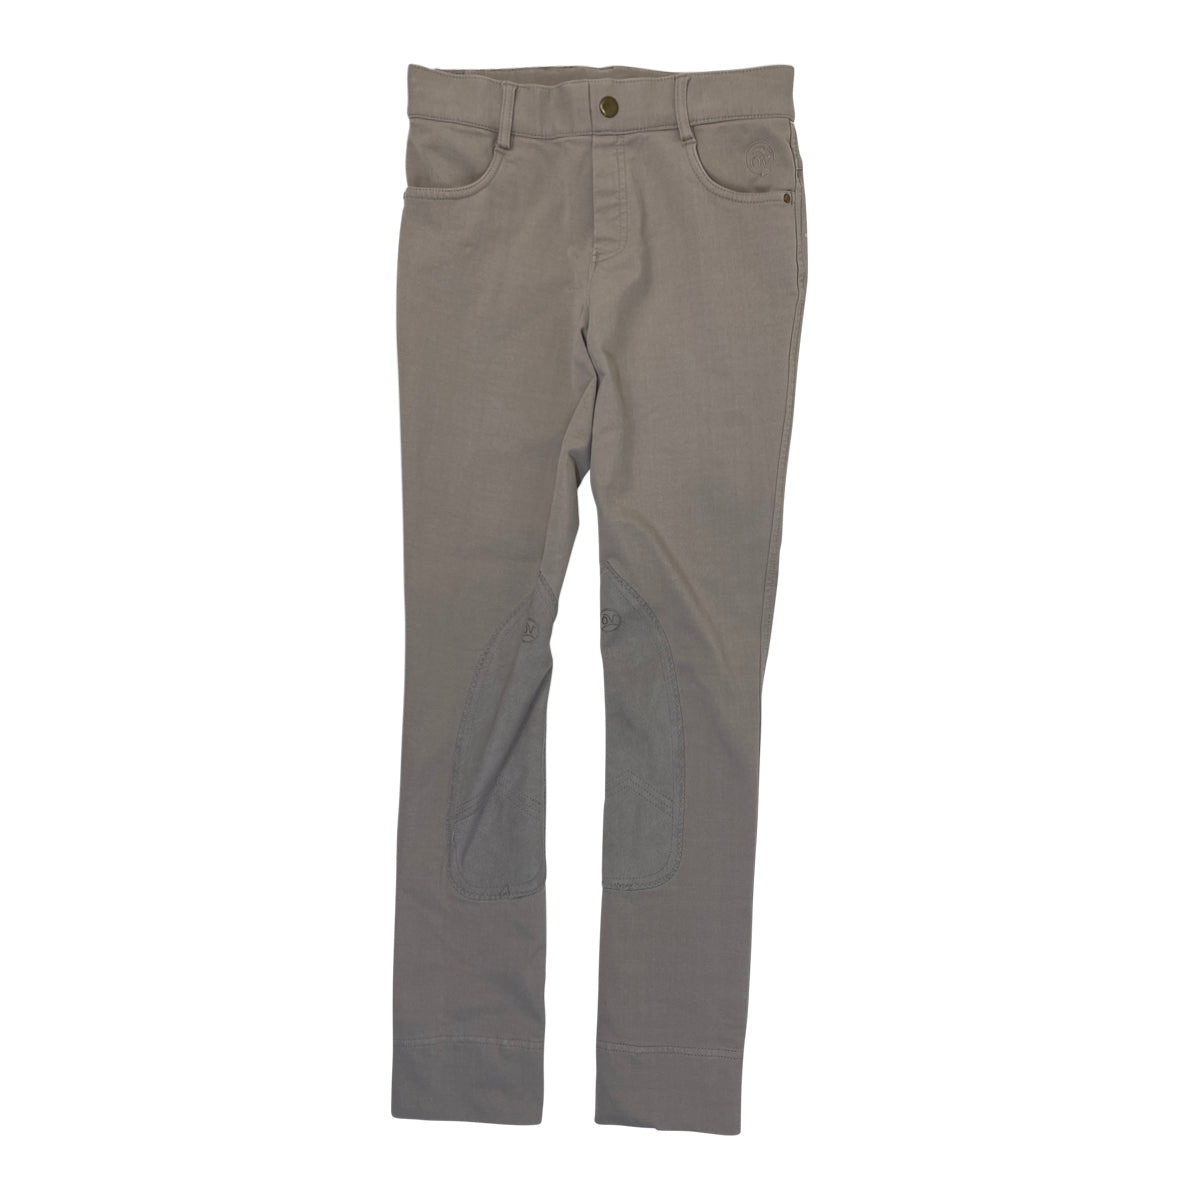 Ovation Kids Pull-On Knee Patch Breeches in Tan